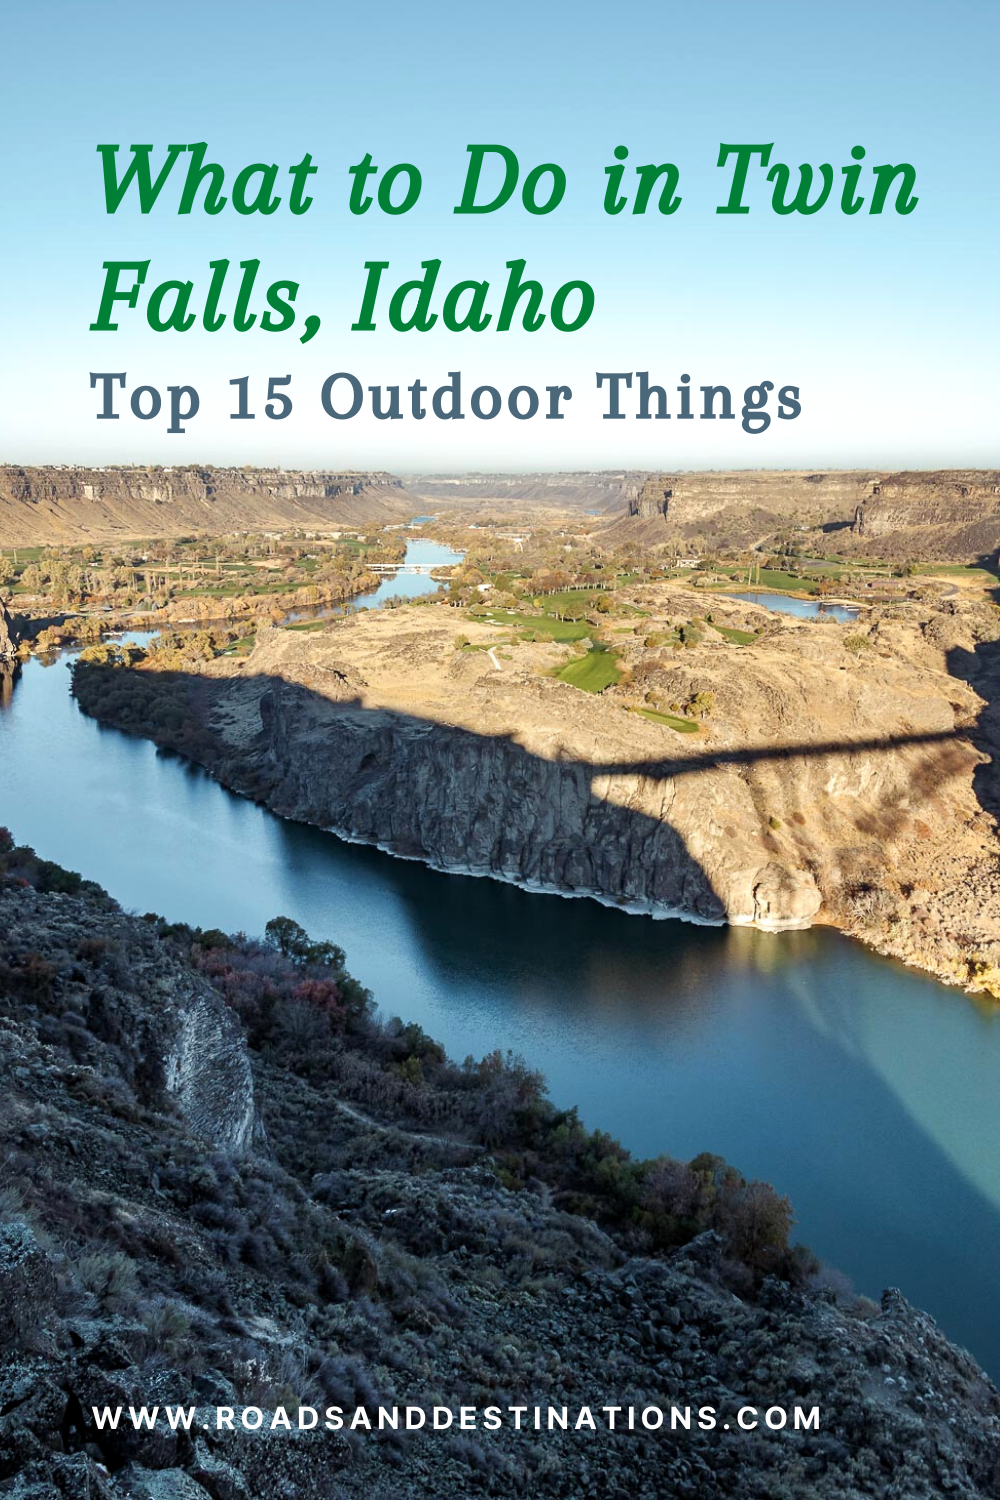 Outdoor Things to Do in Twin Falls, Idaho - Roads and Destinations, roadsanddestinations.com